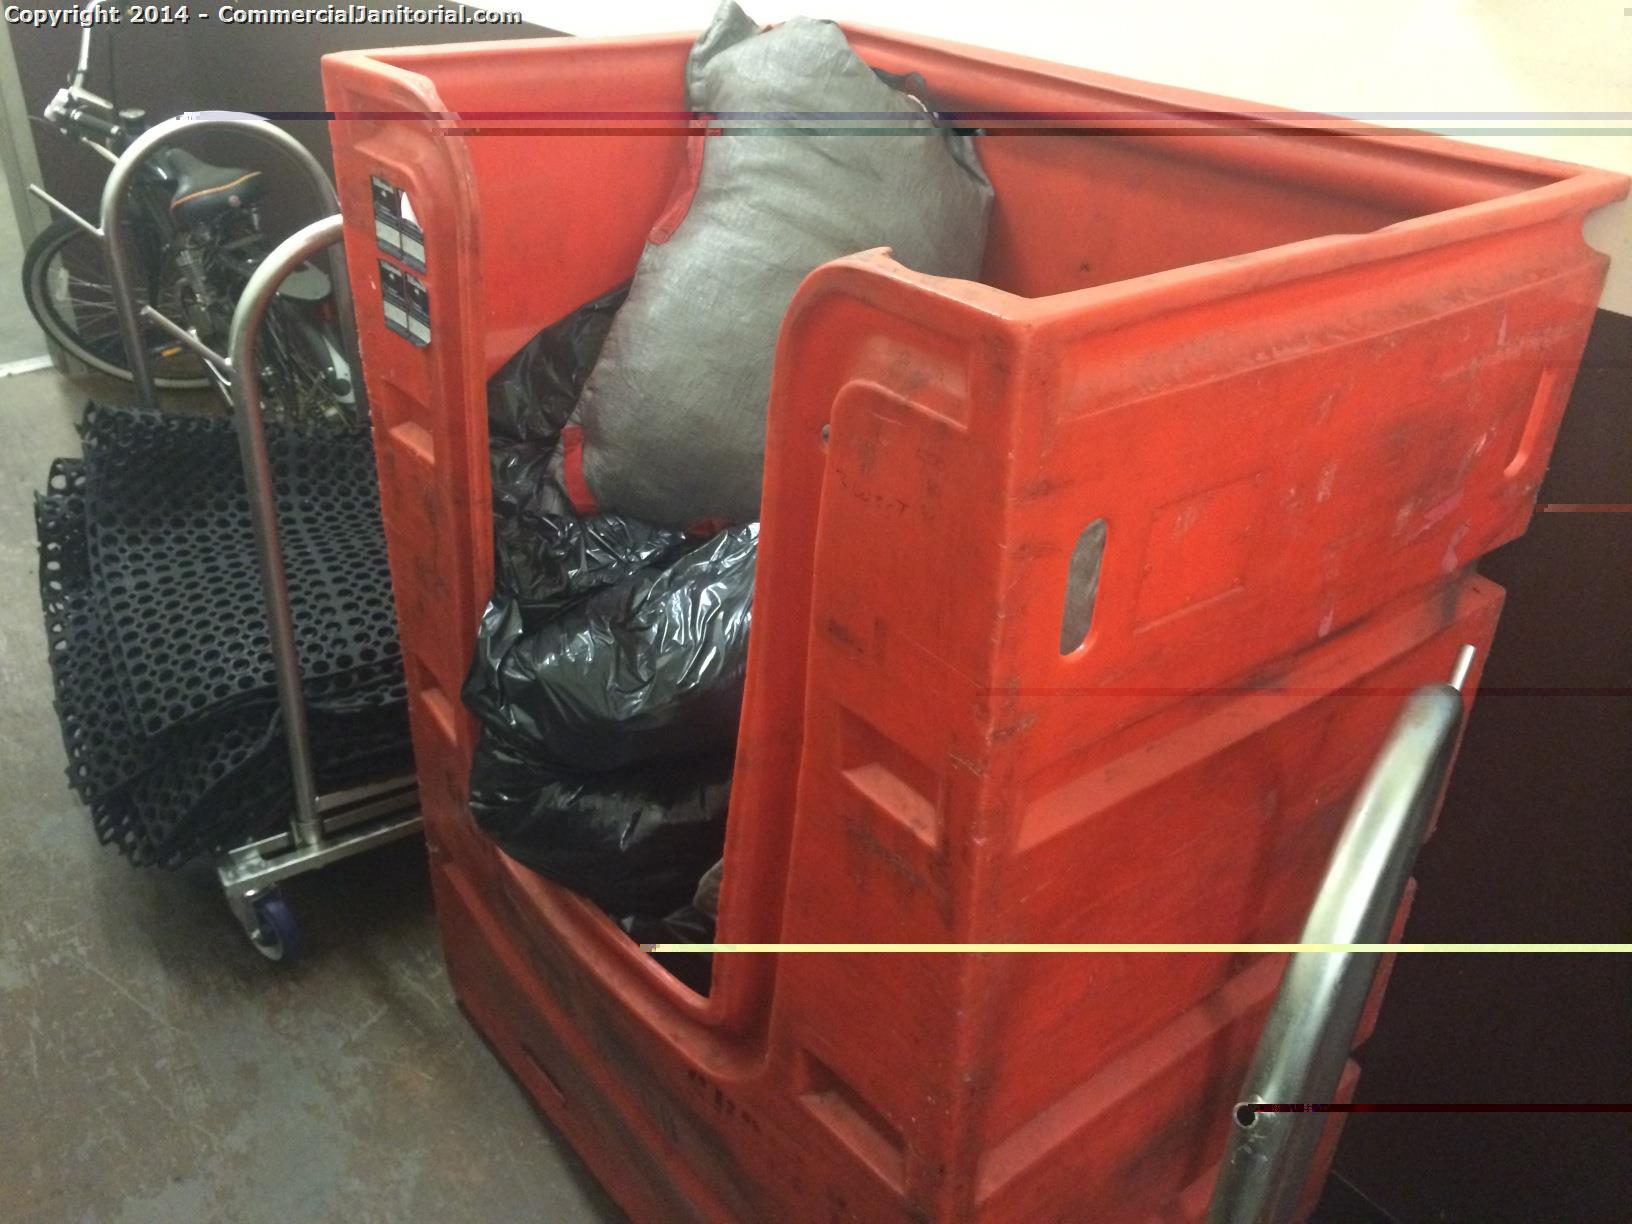 Jim-

Our teams stacked up the mats for the catering company and placed all trash in bin to be properly disposed of.

Client is very happy with our work.